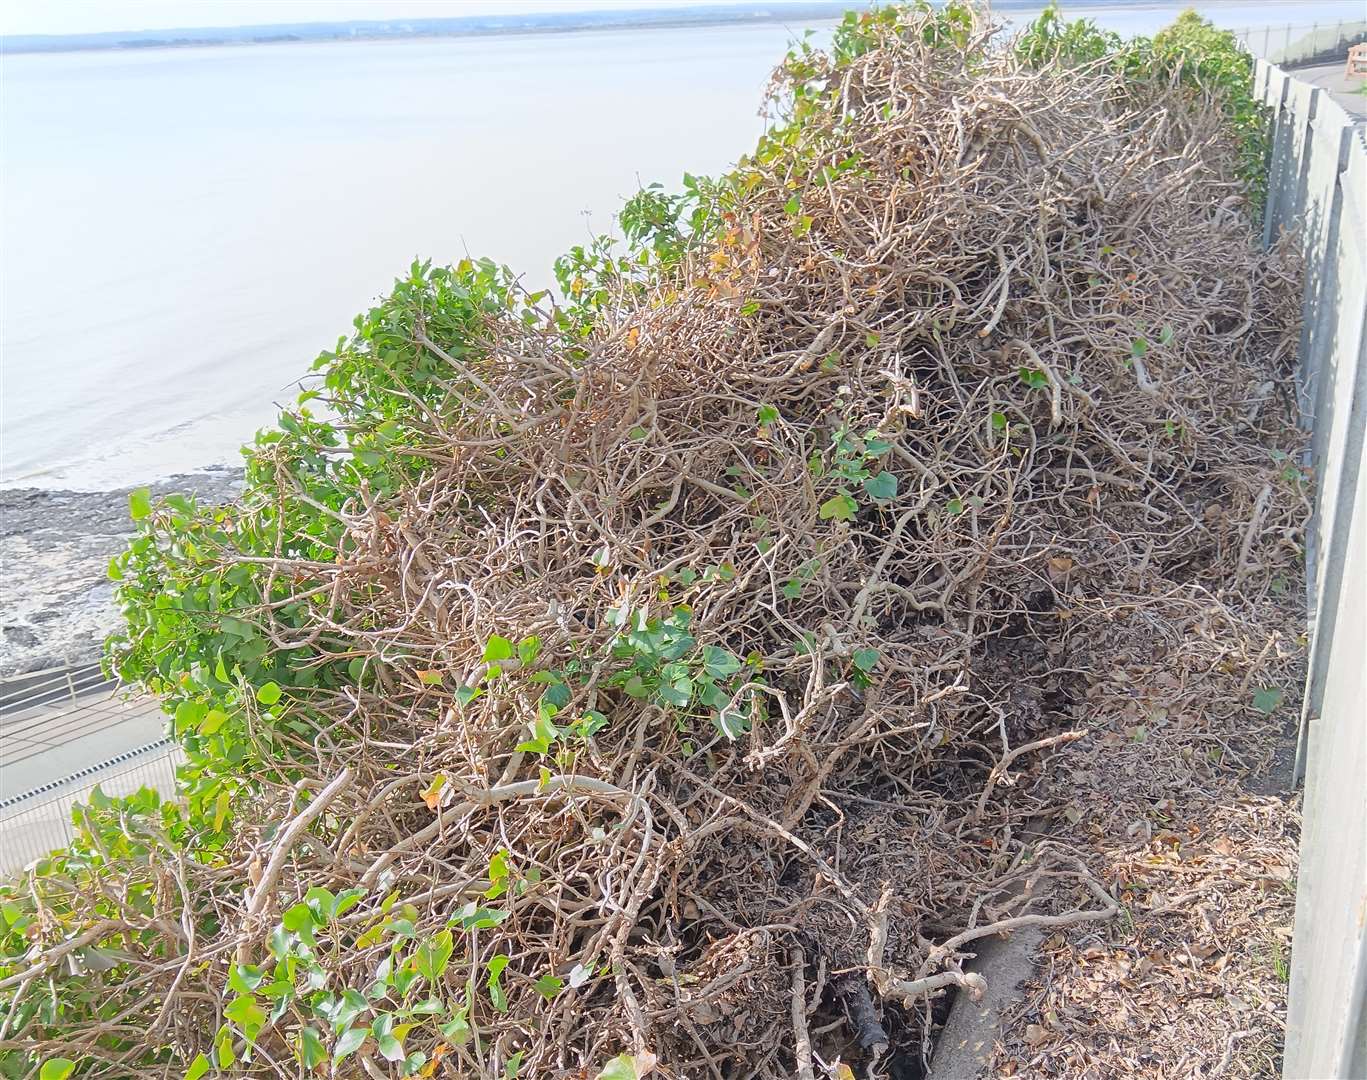 The ivy started coming away as it was cut off from the railings at the top of the cliff. Picture: Nik Mitchell